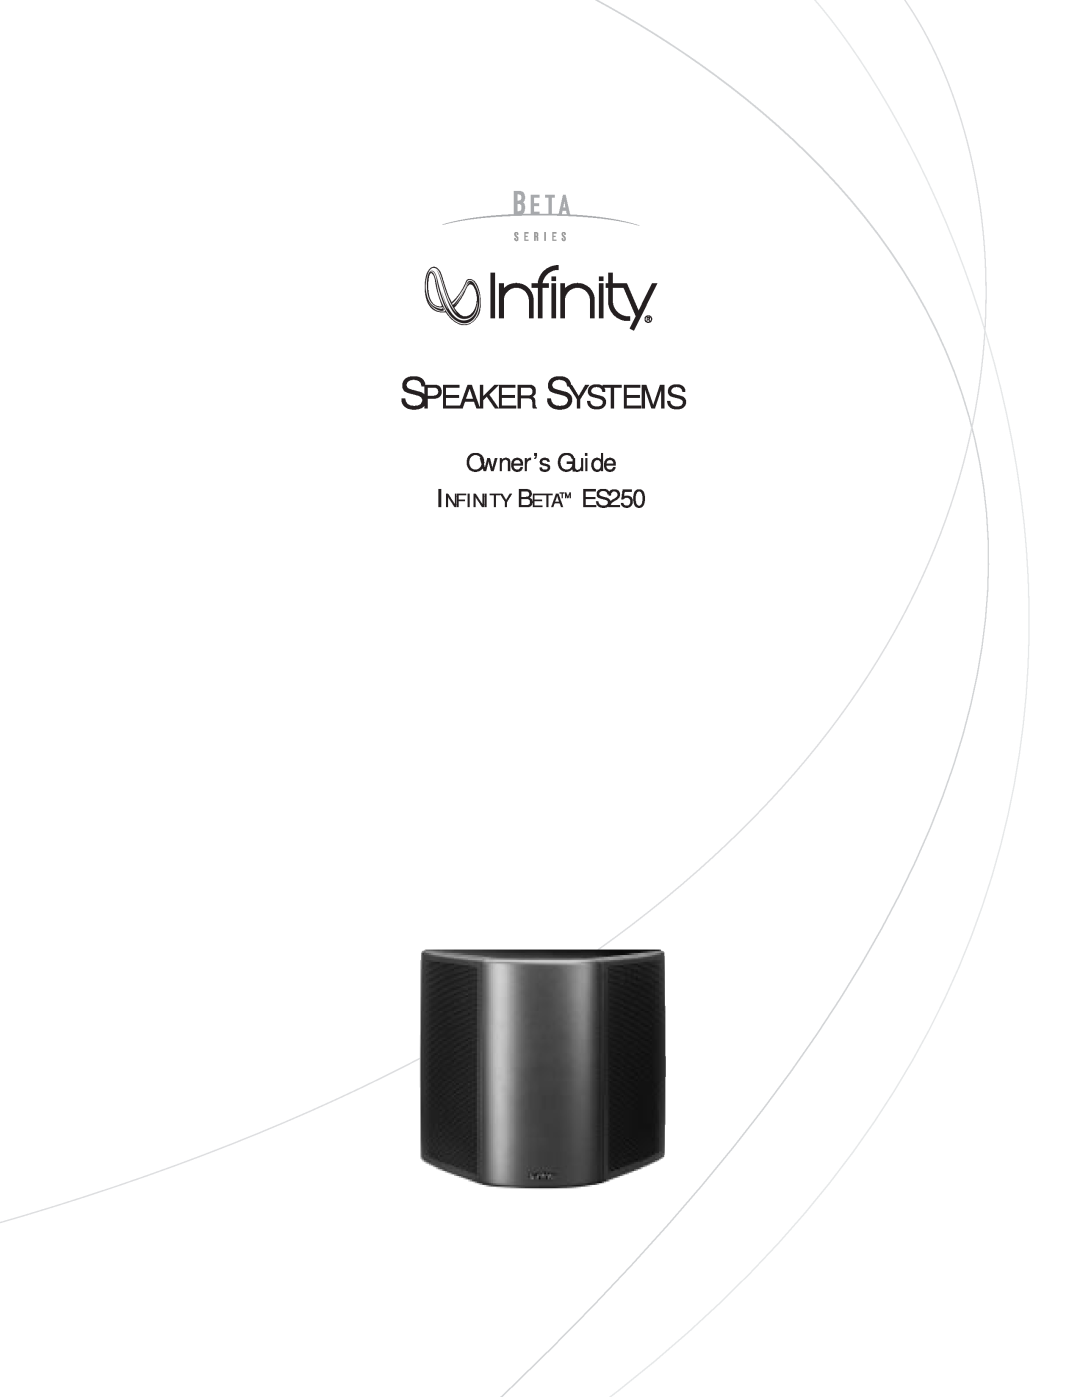 Infinity manual Speaker Systems, Owner’s Guide, INFINITY BETA ES250 